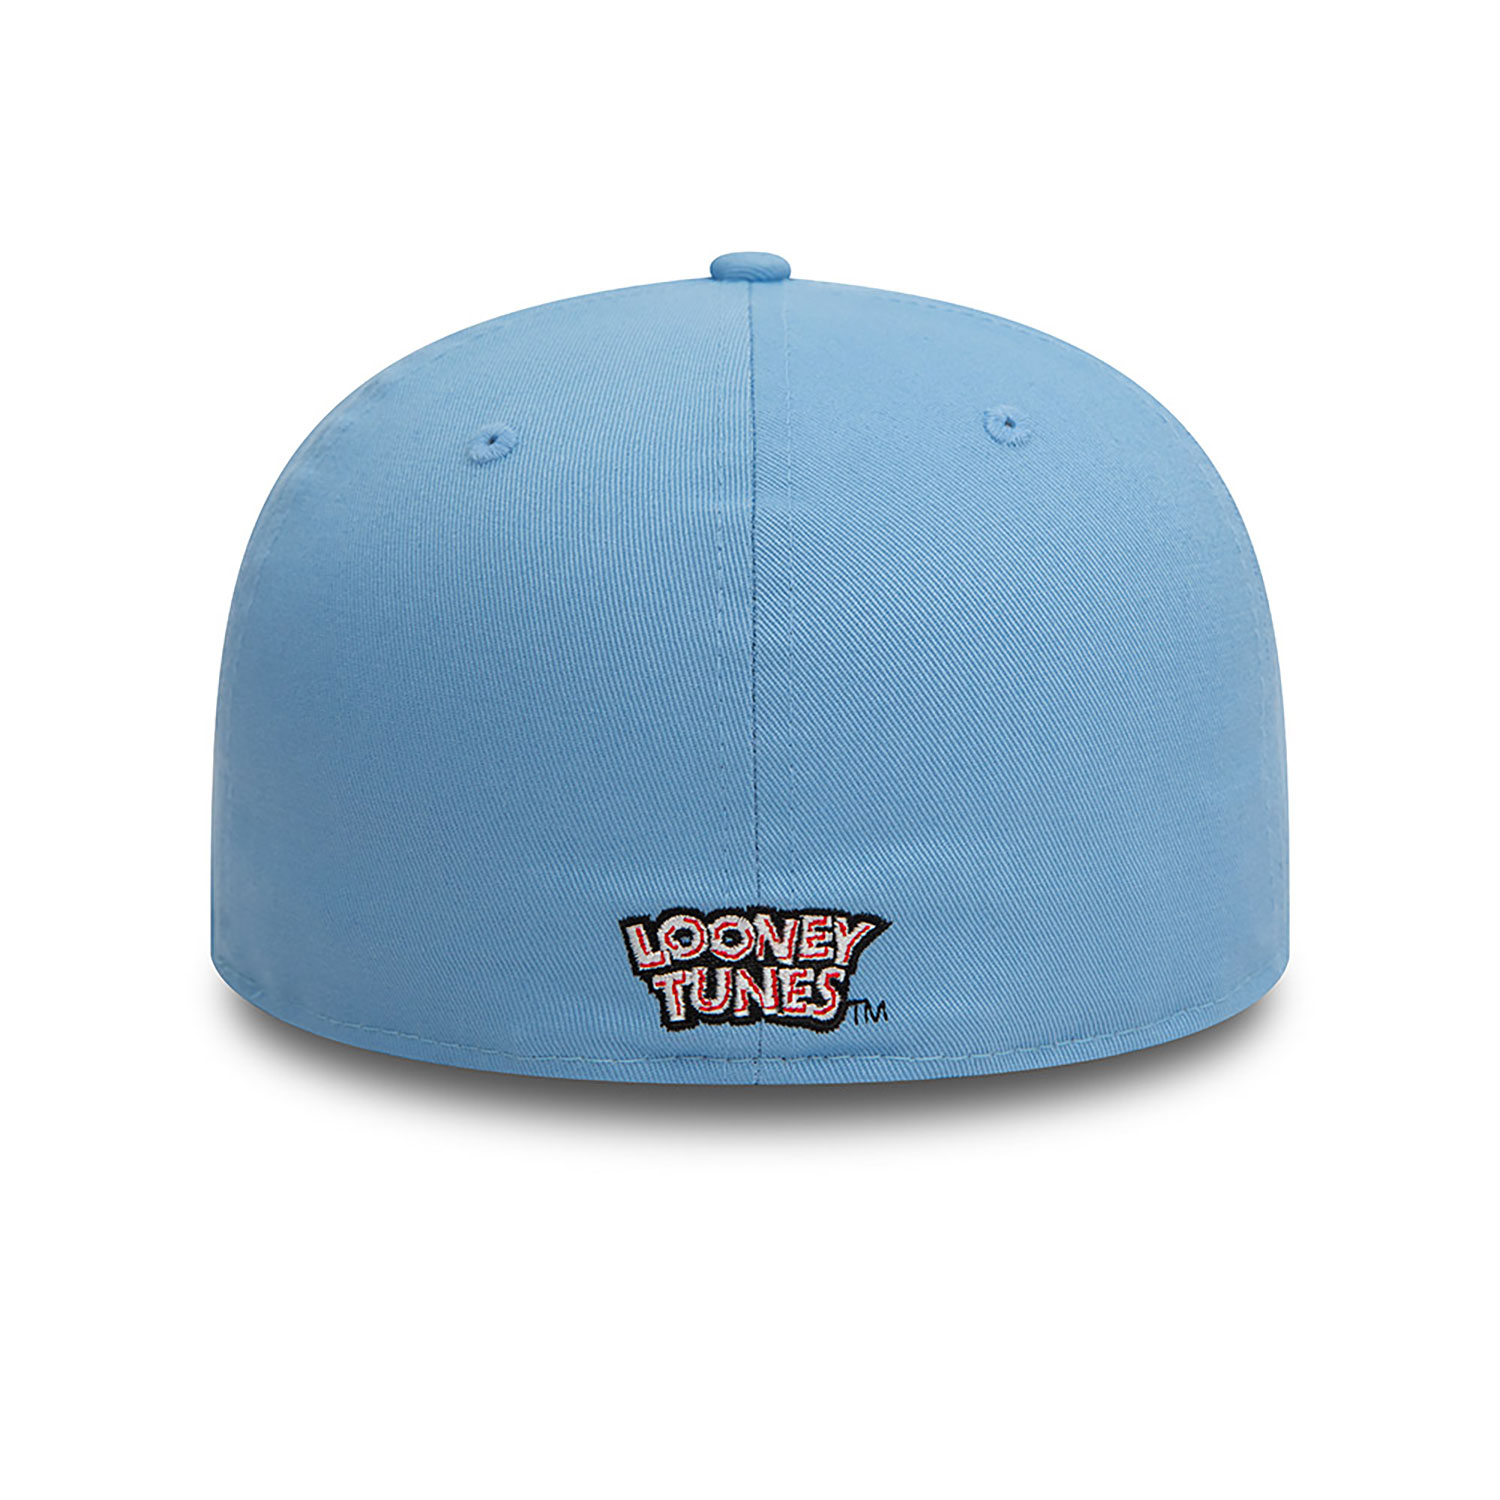 Tweety Pie Warner Brothers Festive Pastel Blue 59FIFTY Fitted Cap